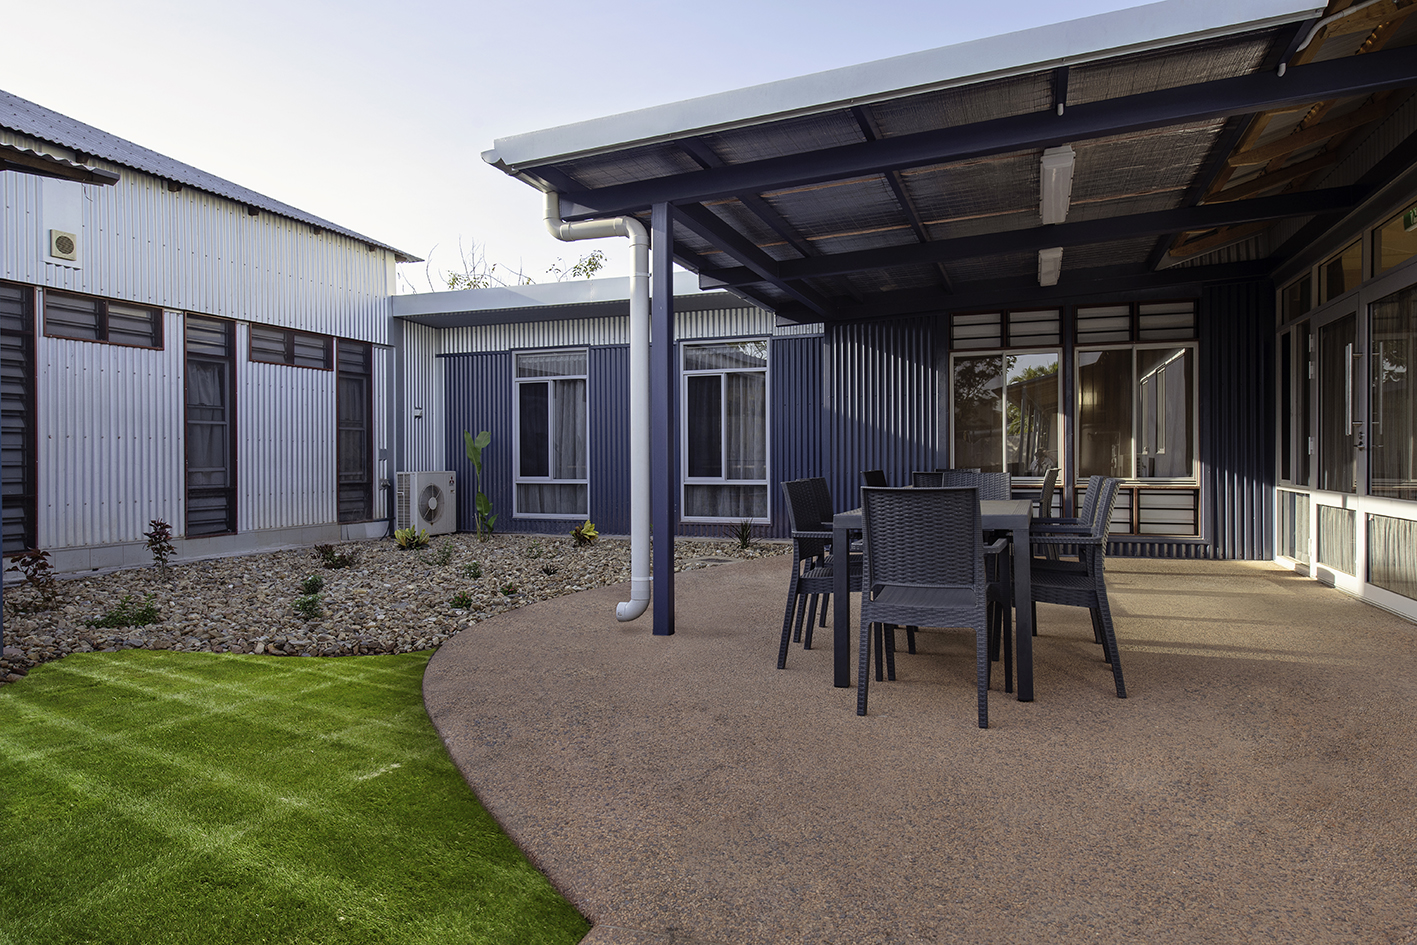 Terrace Gardens Residential Aged Care facility Hodgkison Architects